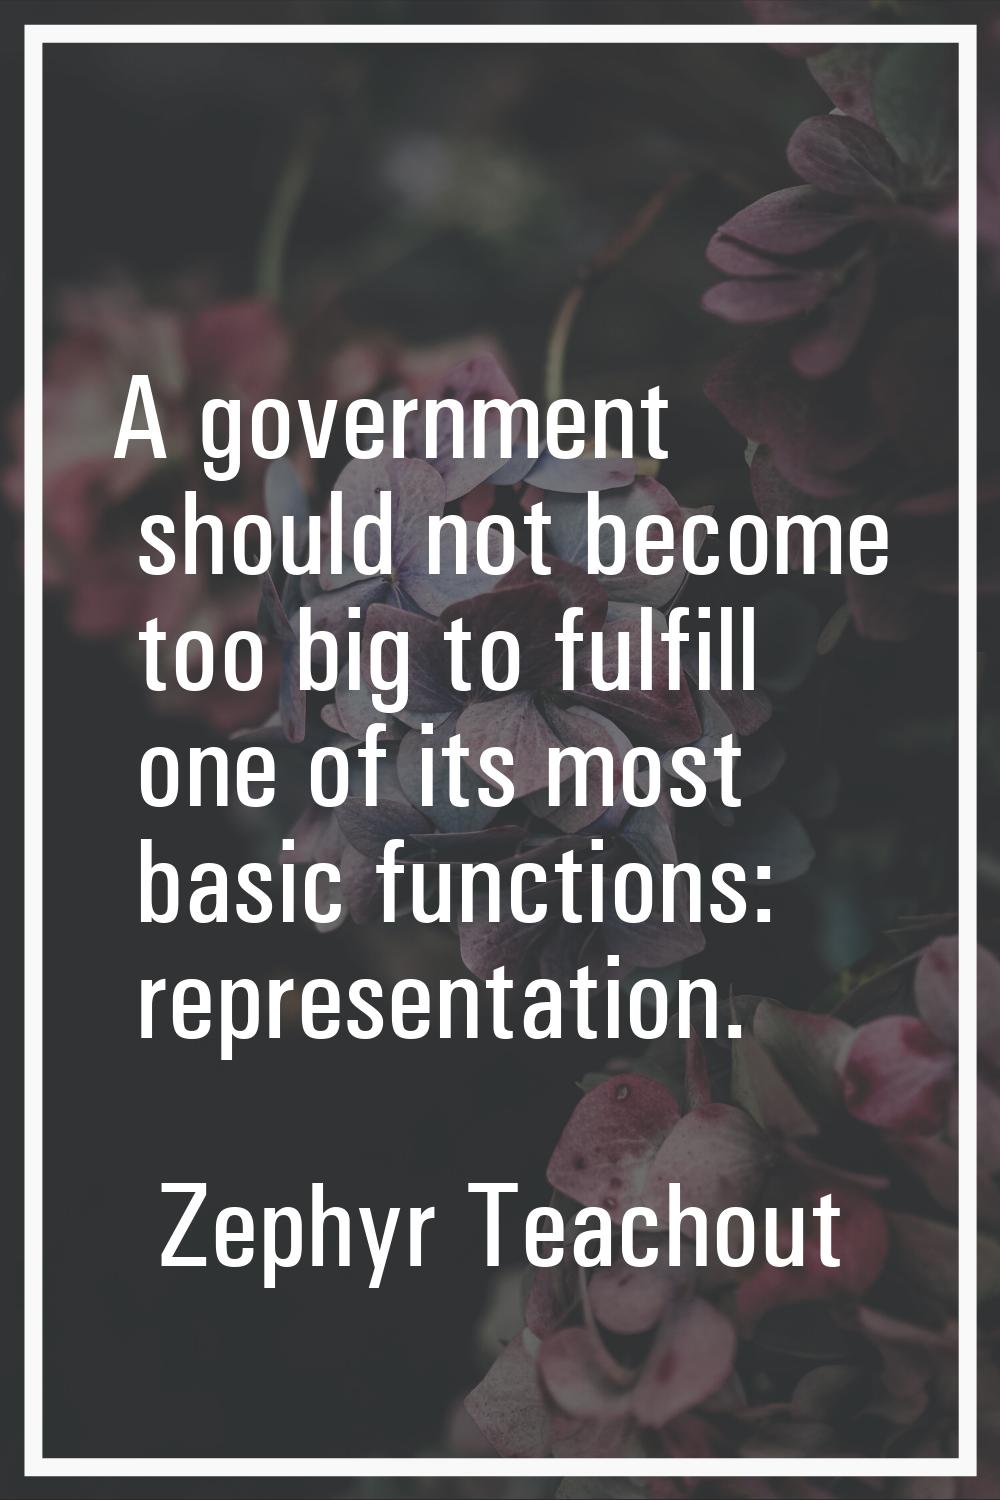 A government should not become too big to fulfill one of its most basic functions: representation.